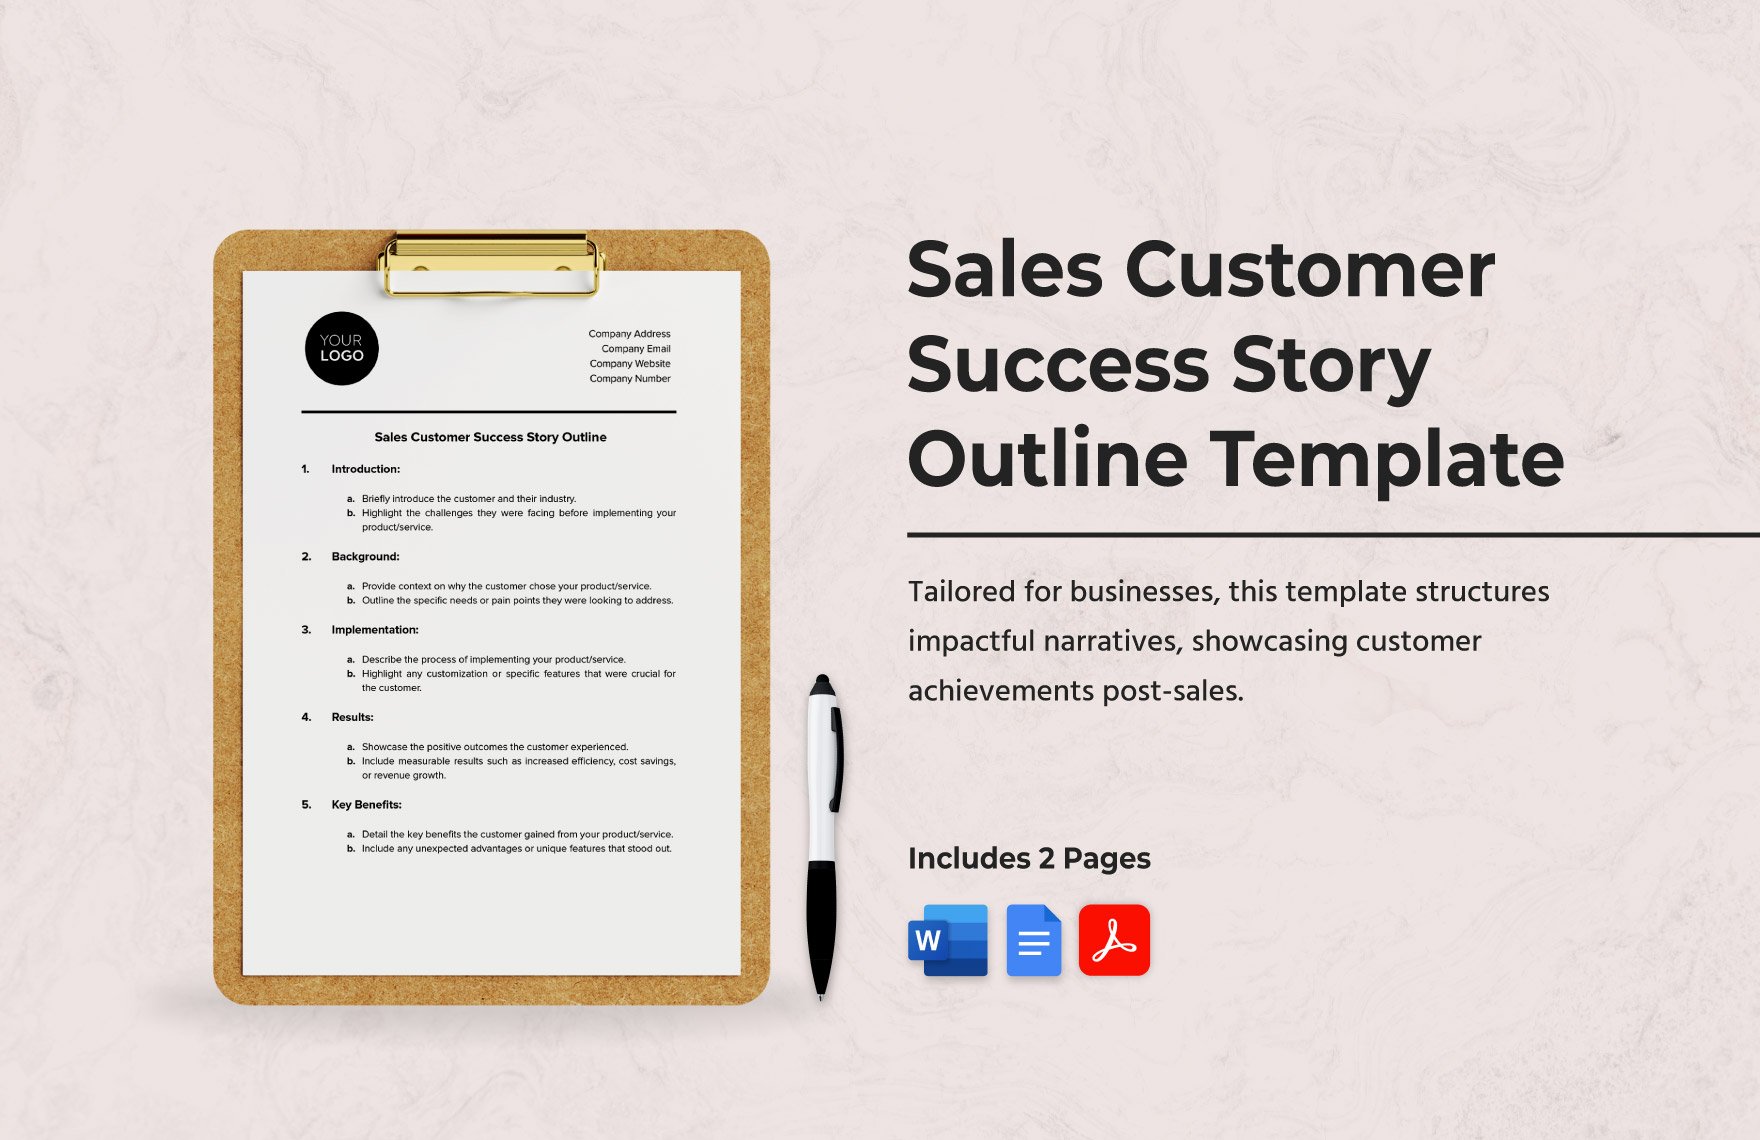 Sales Customer Success Story Outline Template